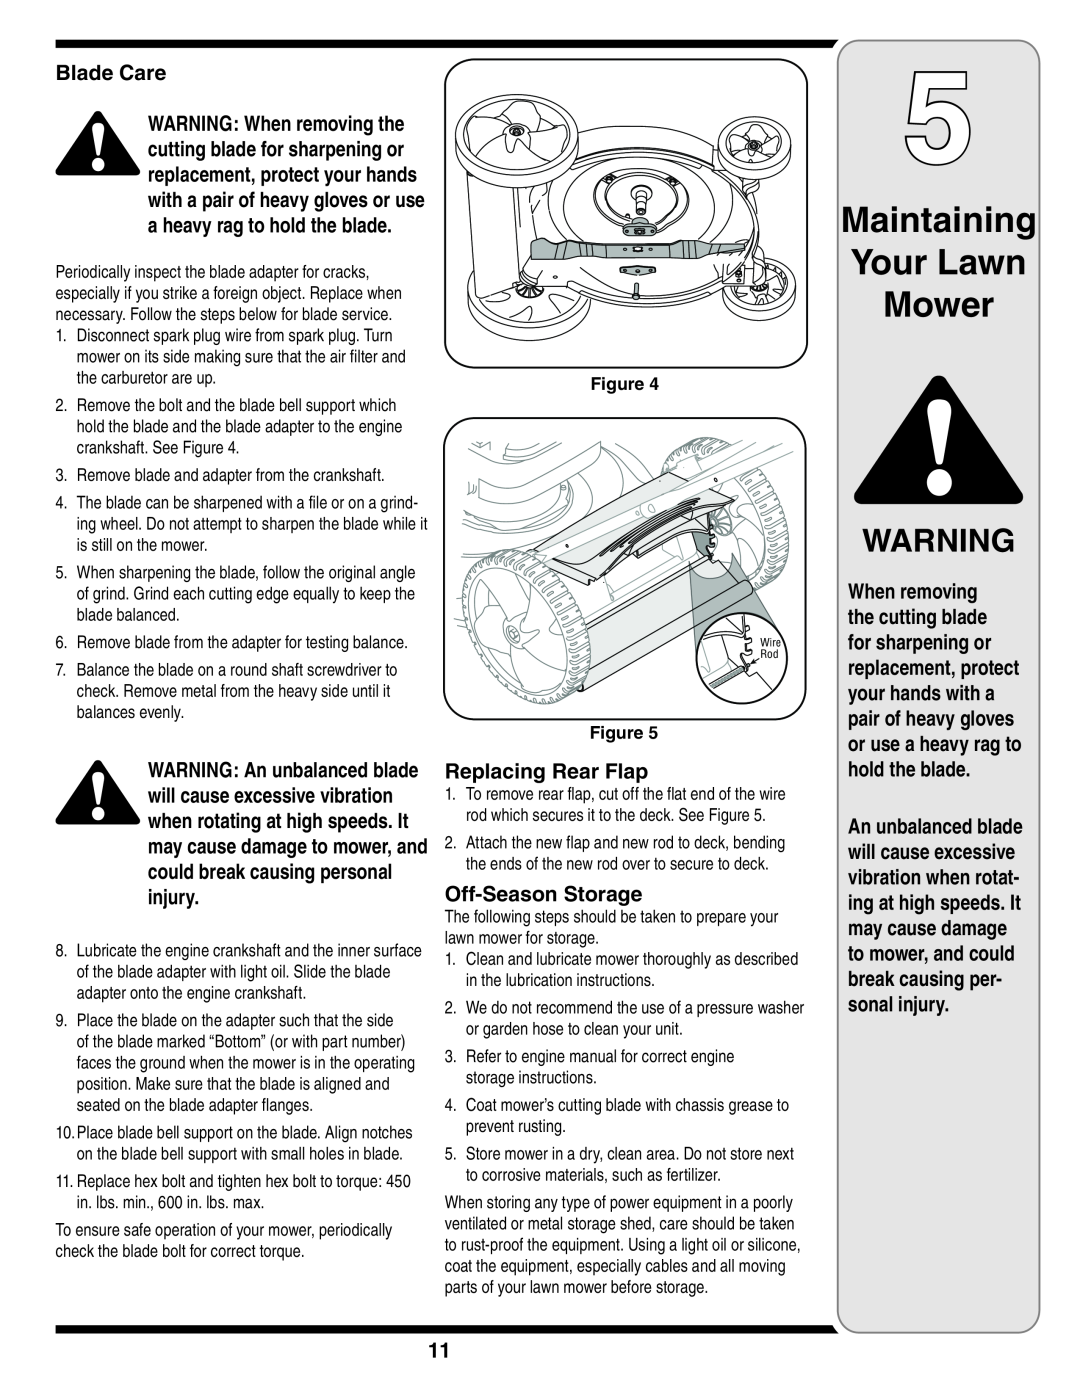 MTD 584 warranty Maintaining Your Lawn Mower, Blade Care, Replacing Rear Flap, Off-SeasonStorage, hold the blade 